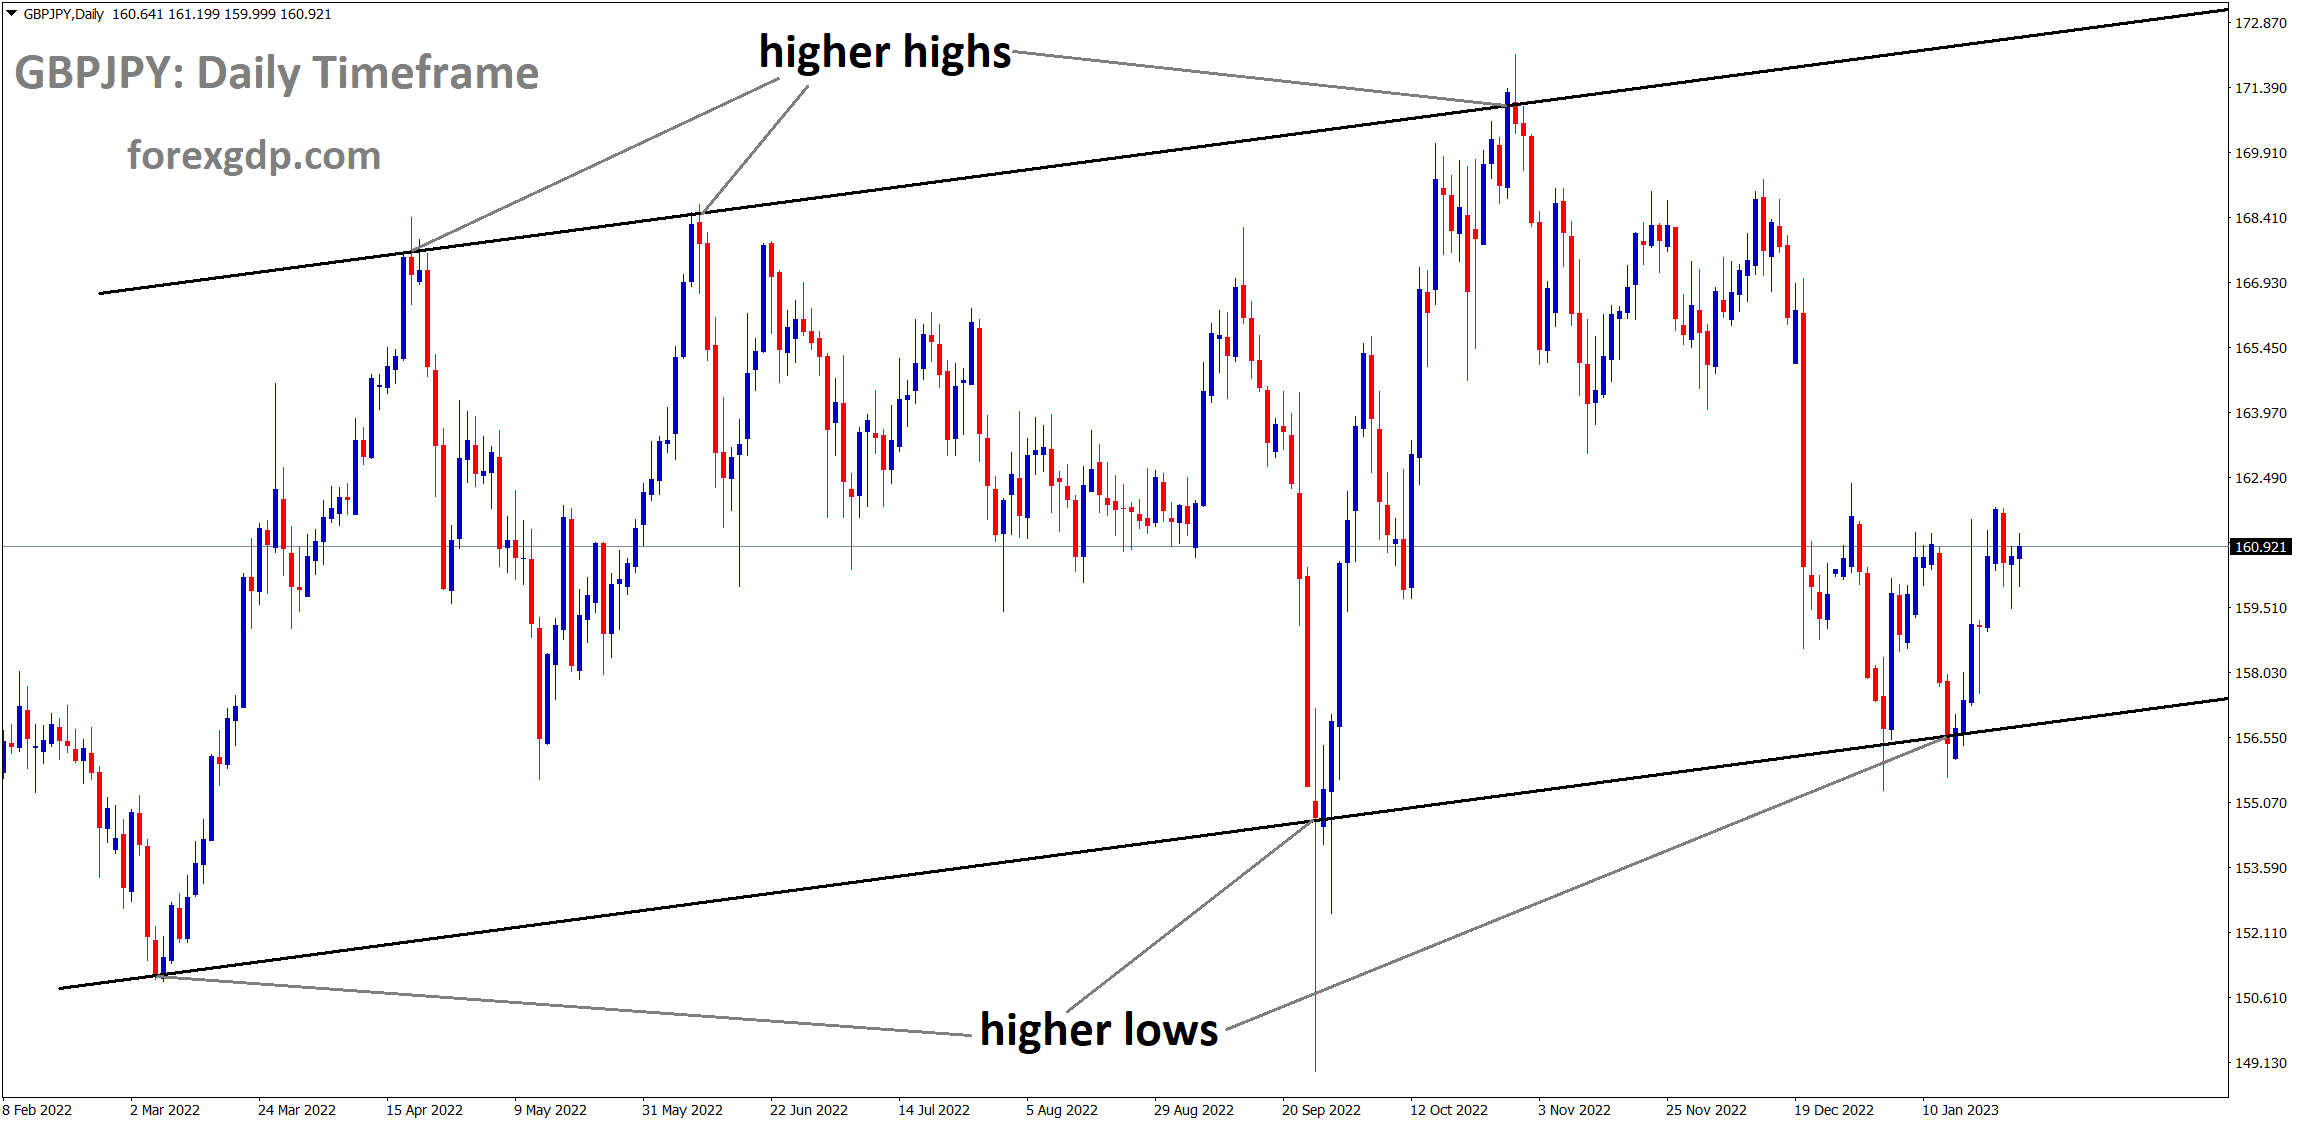 GBPJPY is moving in the Ascending channel and the market has rebounded from the higher low area of the channel.